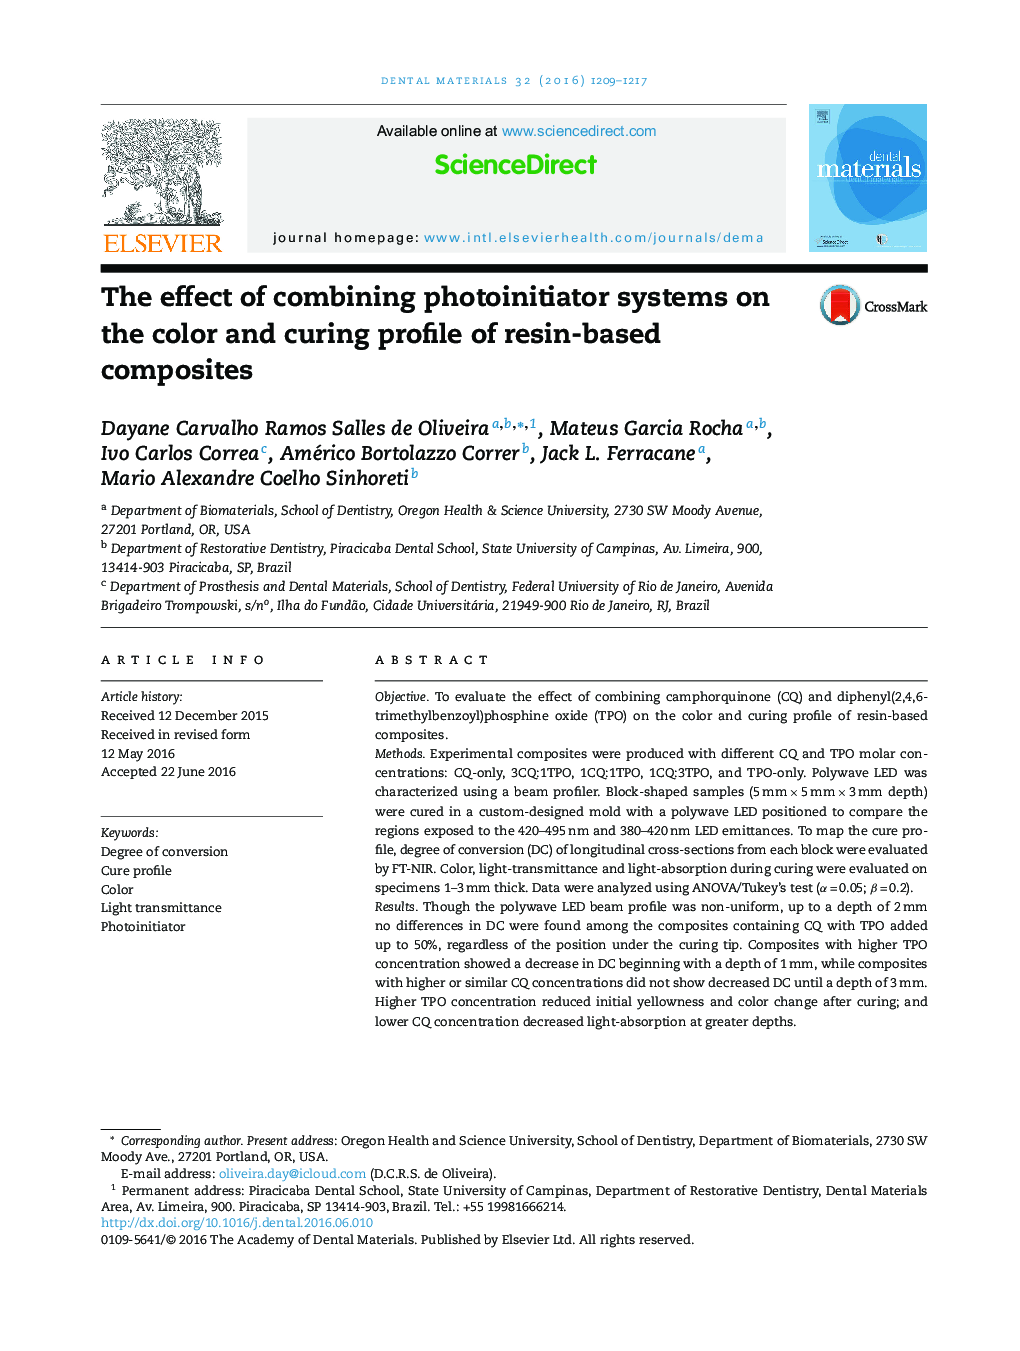 The effect of combining photoinitiator systems on the color and curing profile of resin-based composites